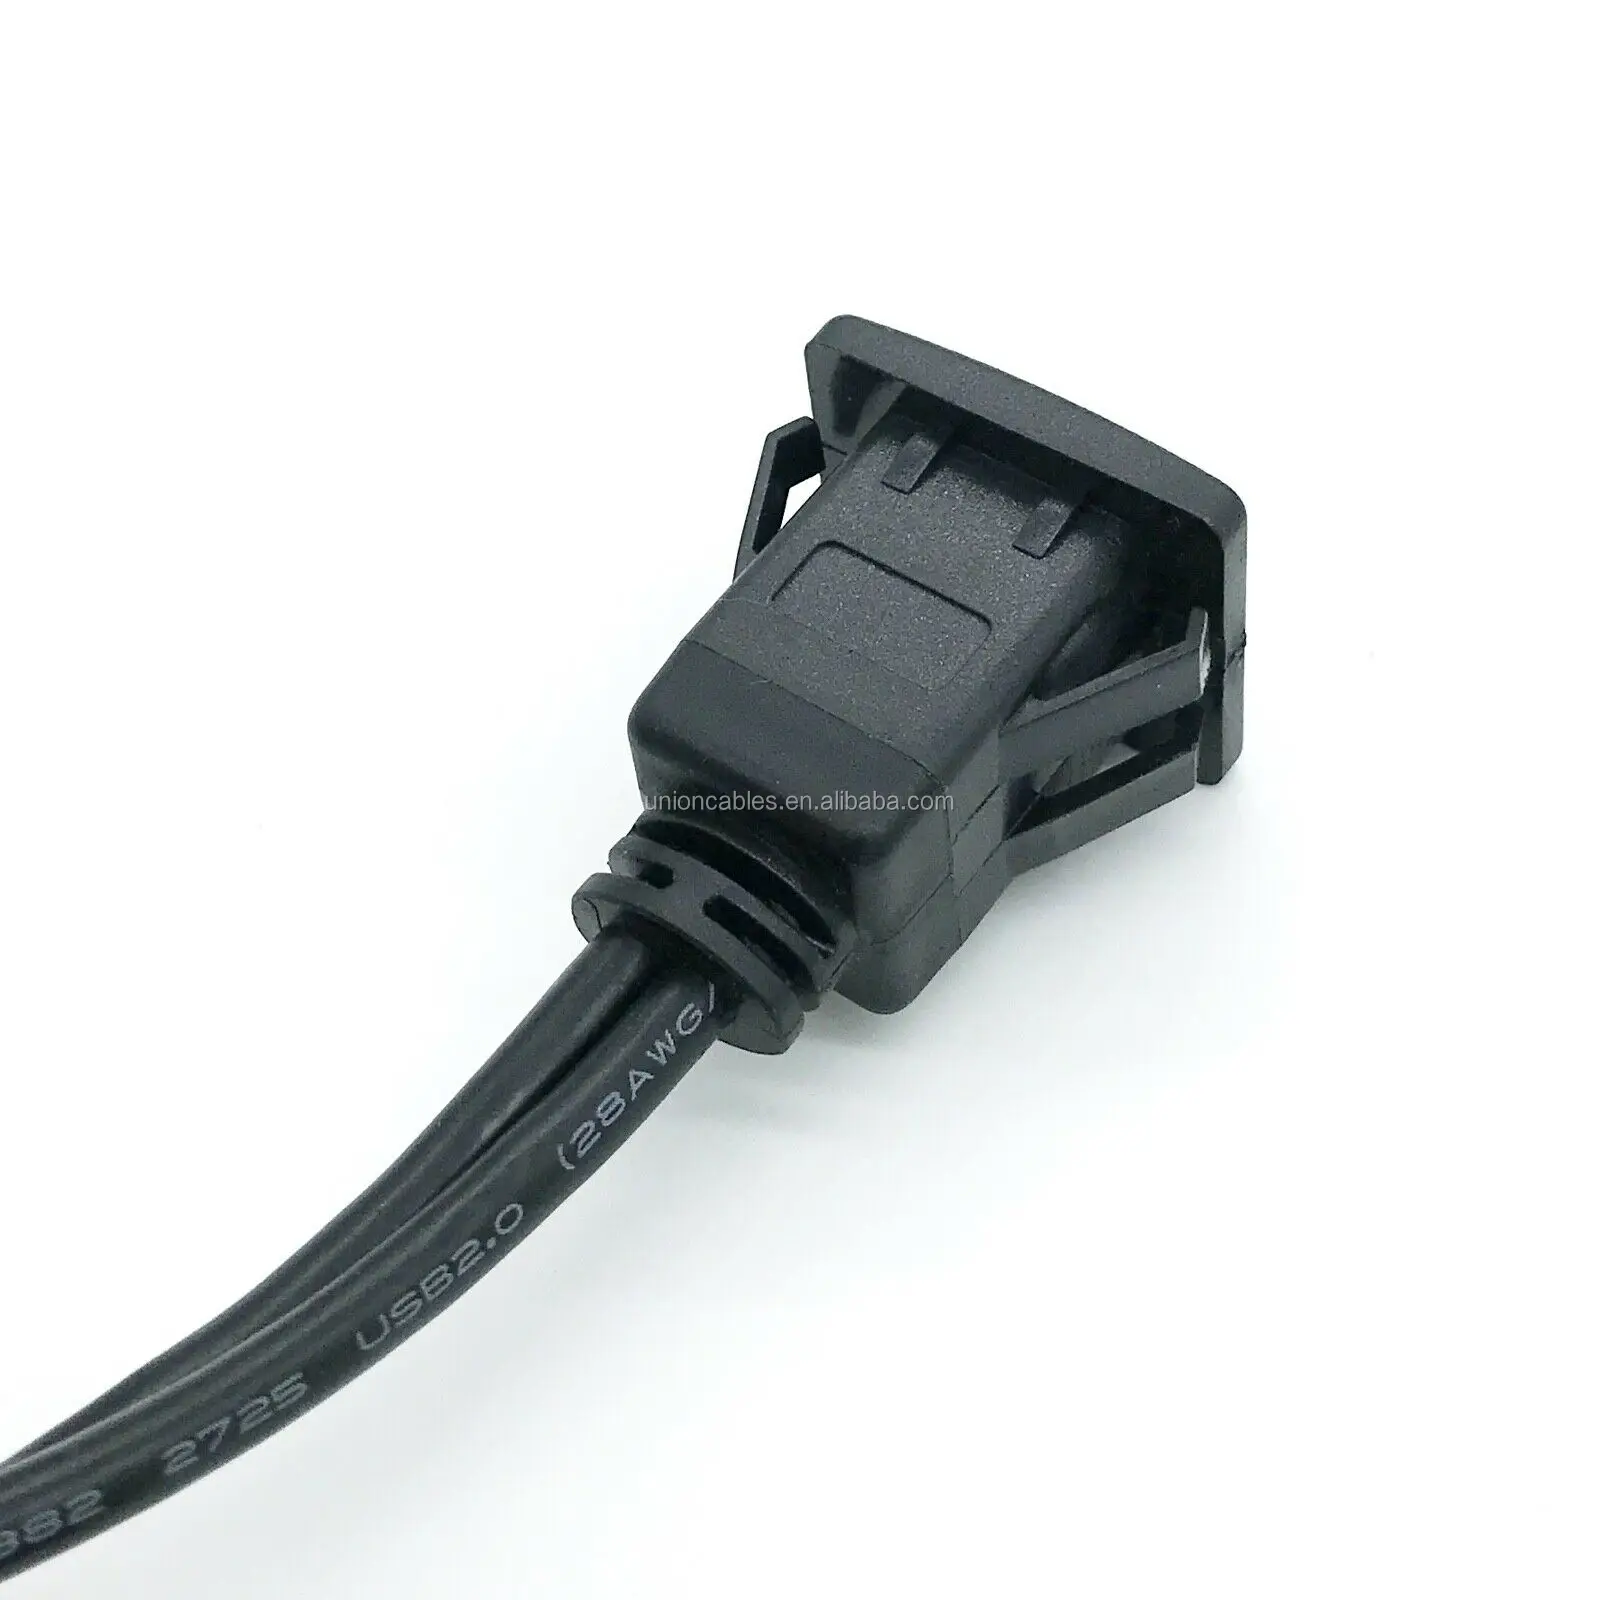 1m Car Dash Board Mount USB 2.0 Male To Female Socket Panel Extension Cable RKES 